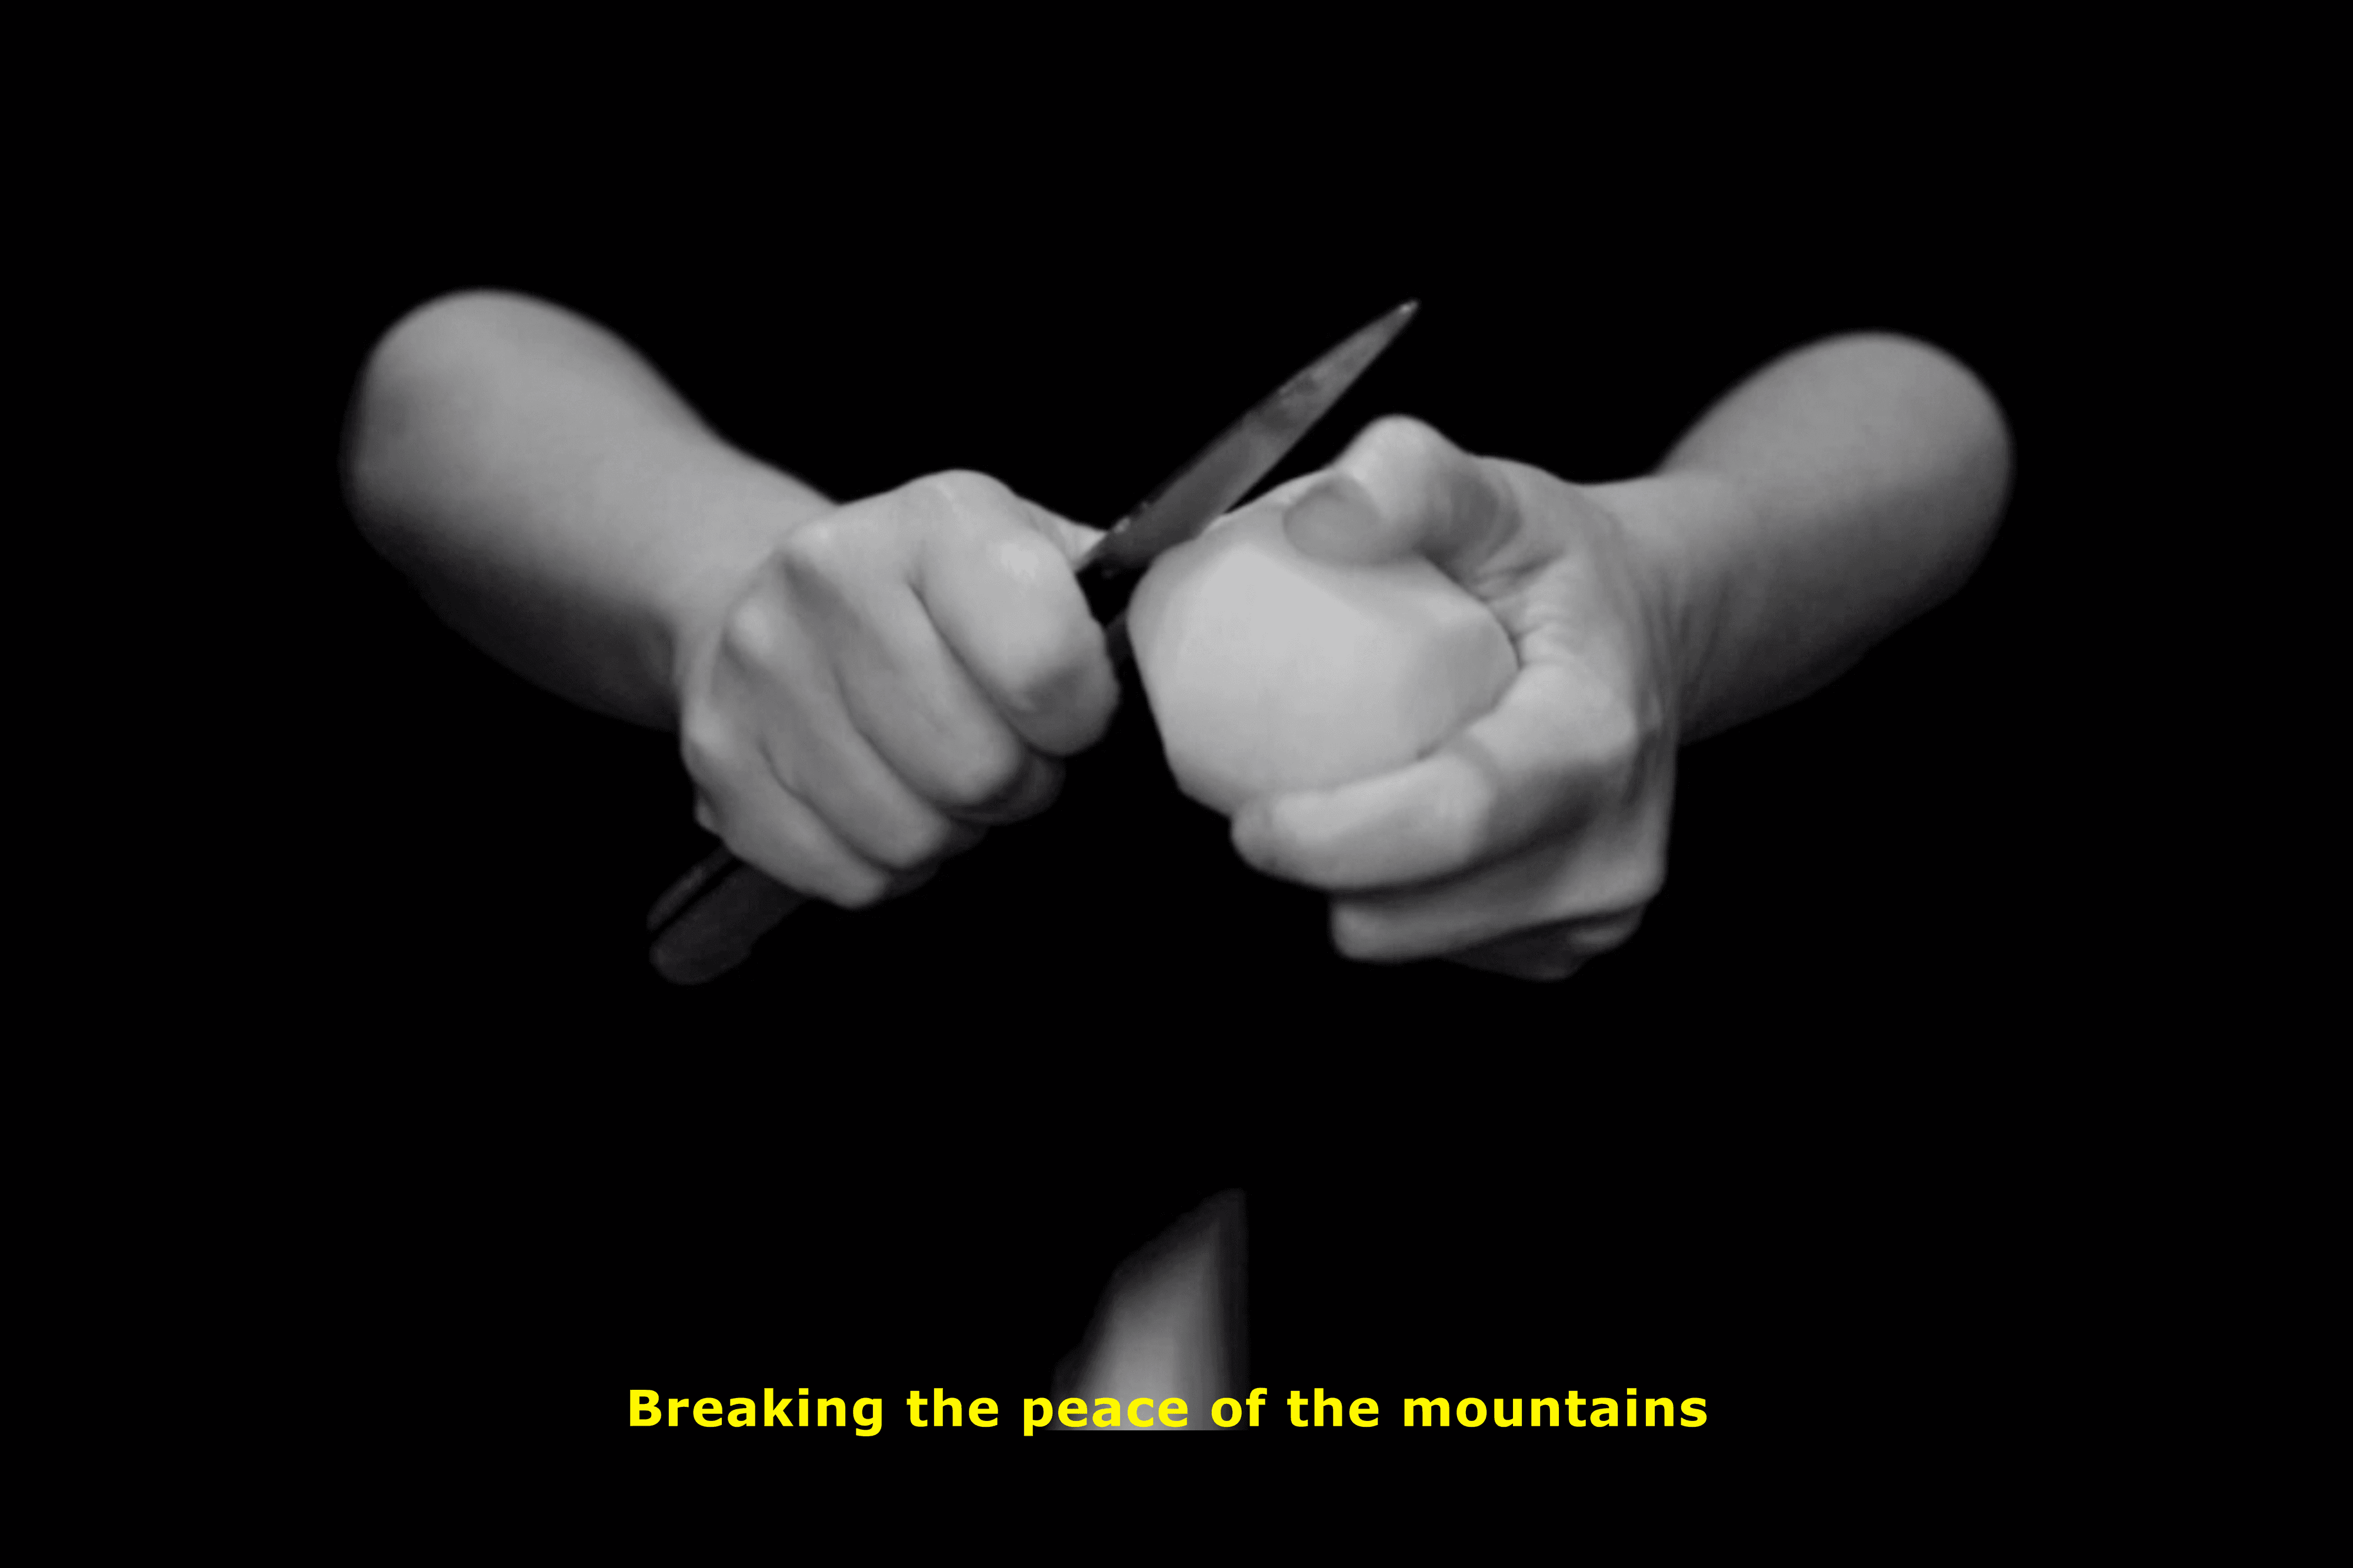 Breaking the peace of the mountains